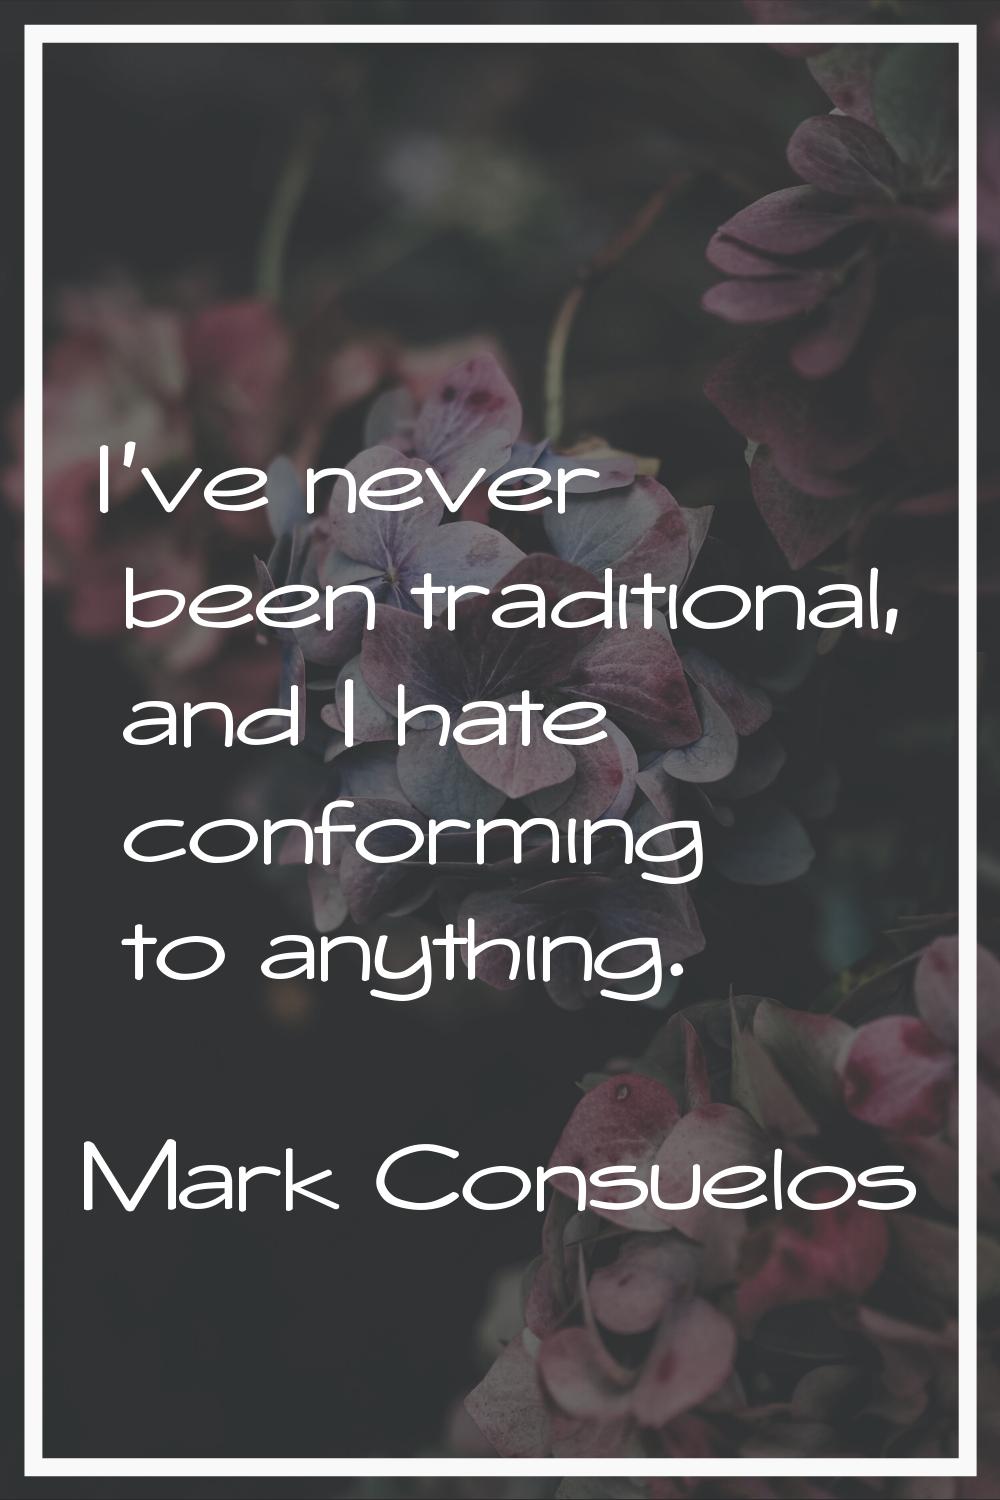 I've never been traditional, and I hate conforming to anything.